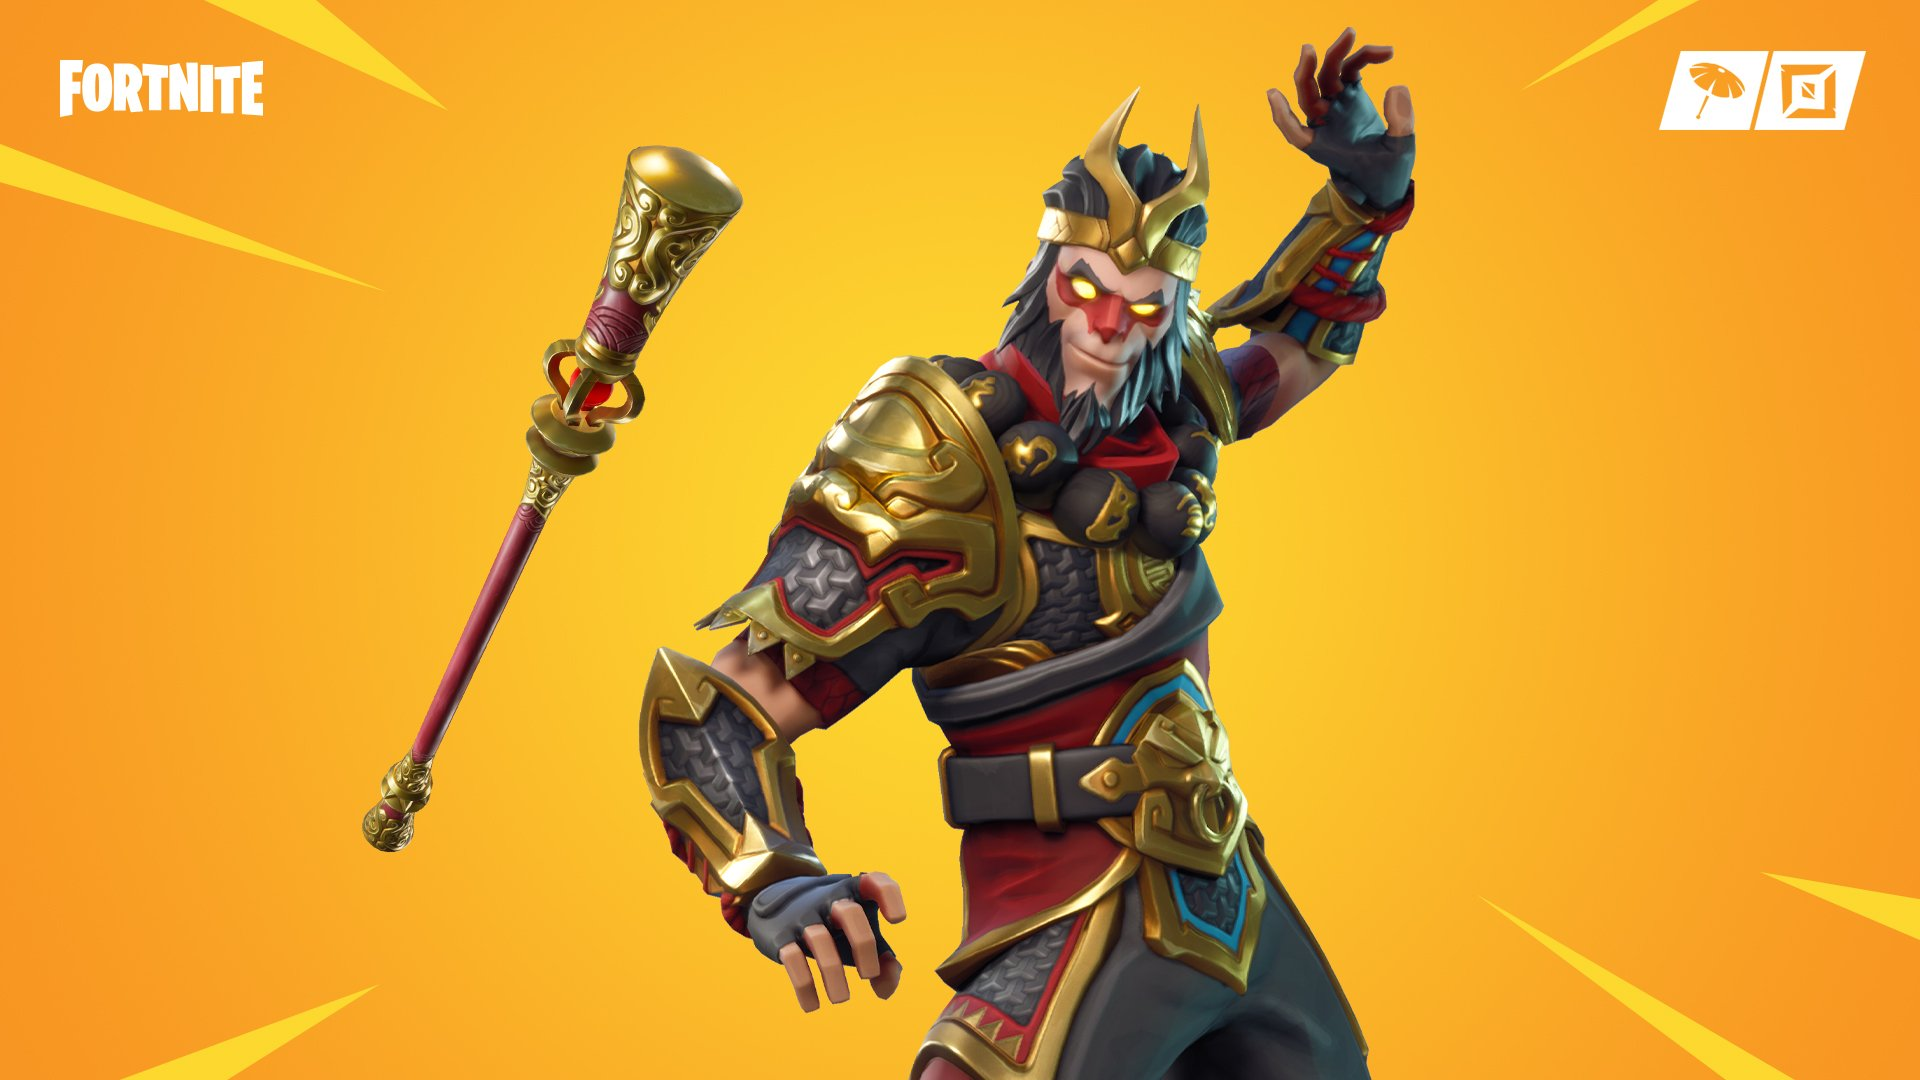 Wukong returns to the Fortnite Item Shop